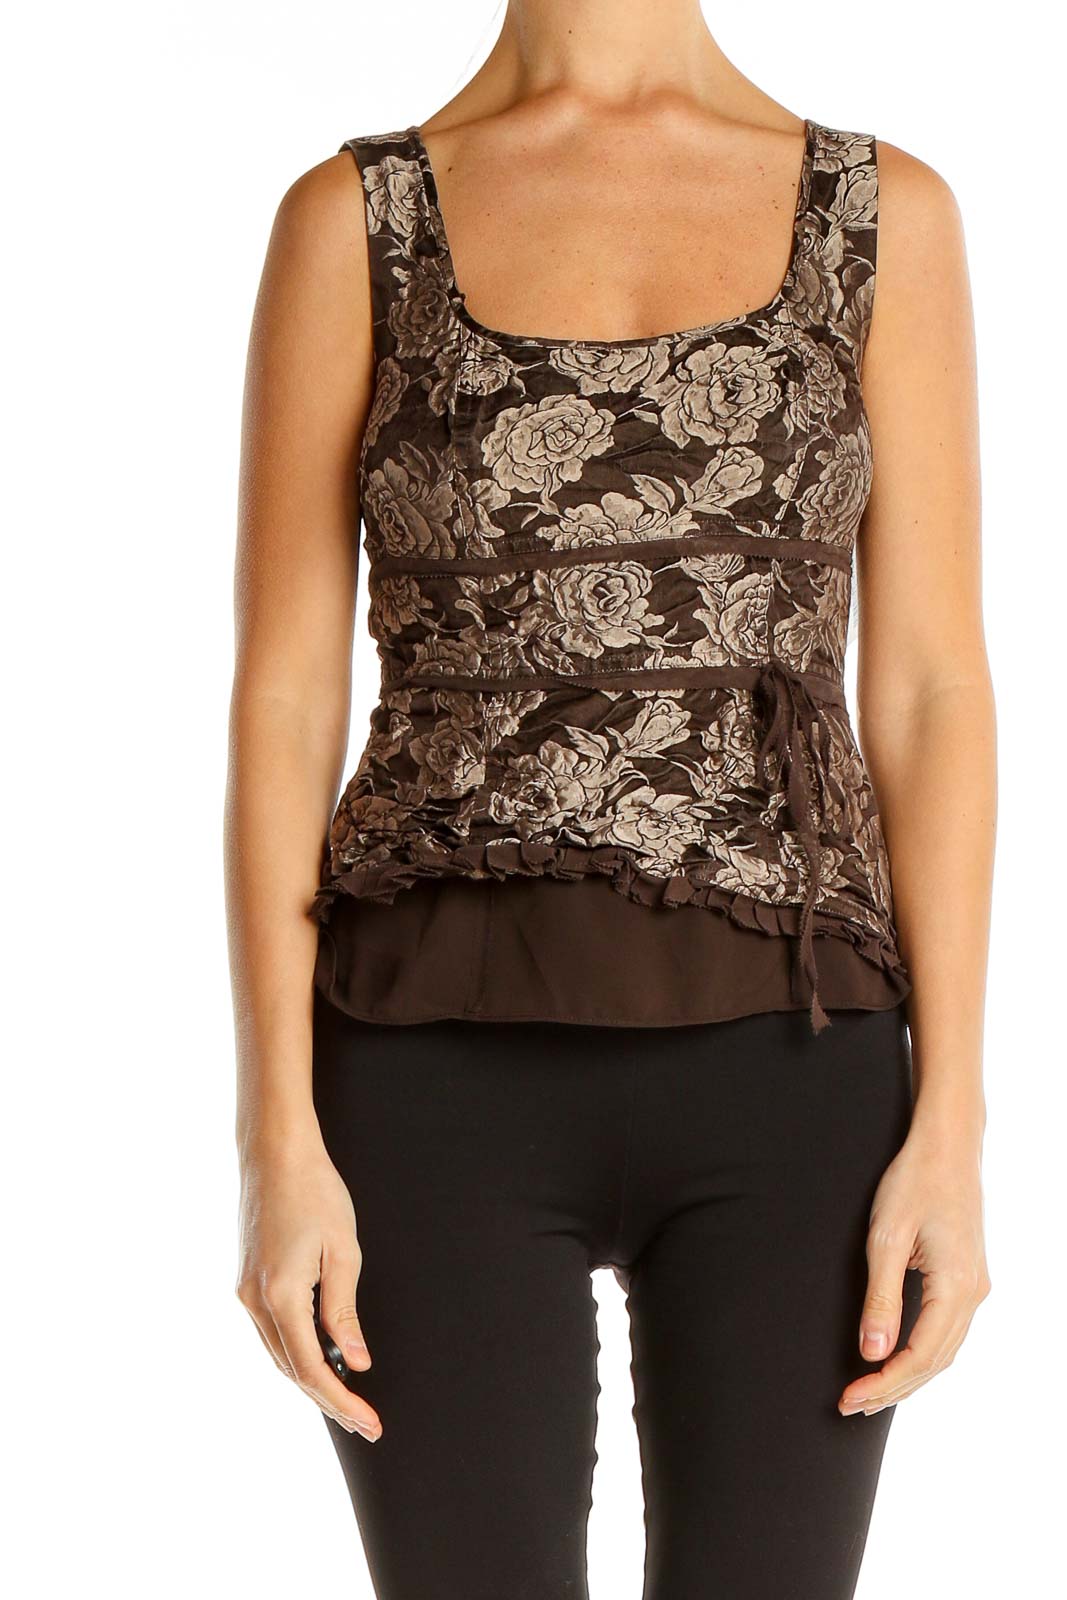 Brown Floral Print Retro Top Front